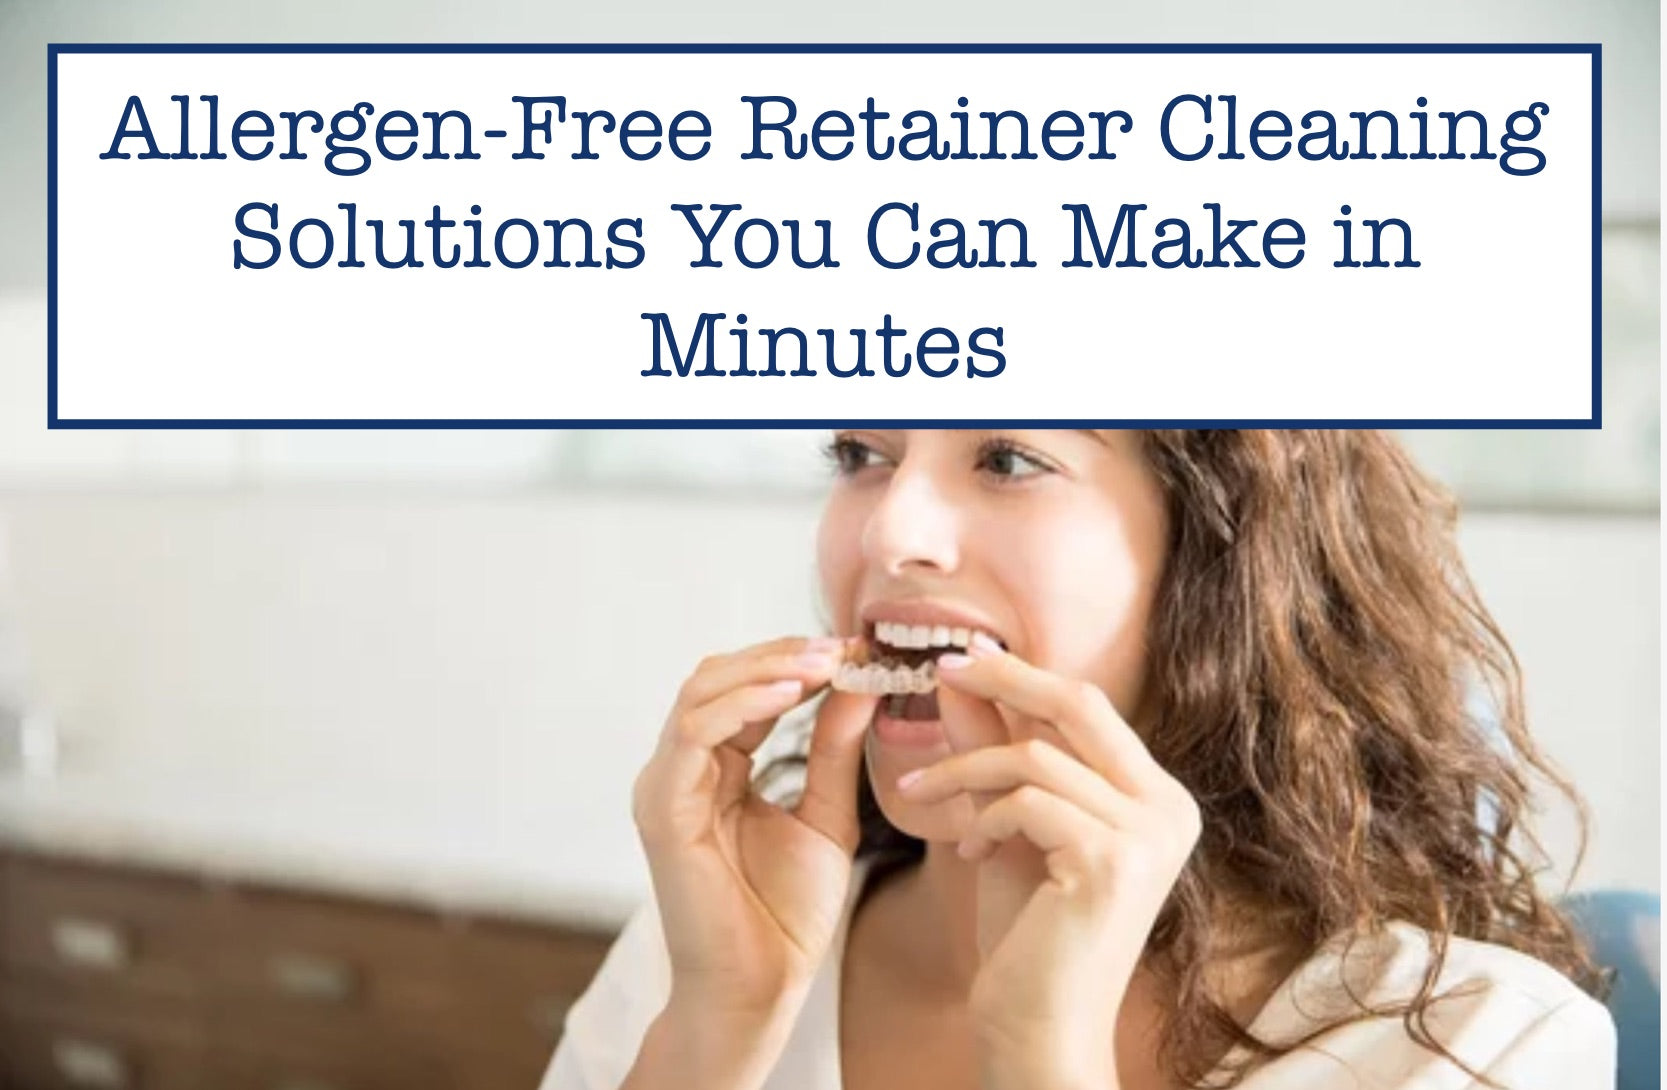 Allergen-Free Retainer Cleaning Solutions You Can Make in Minutes